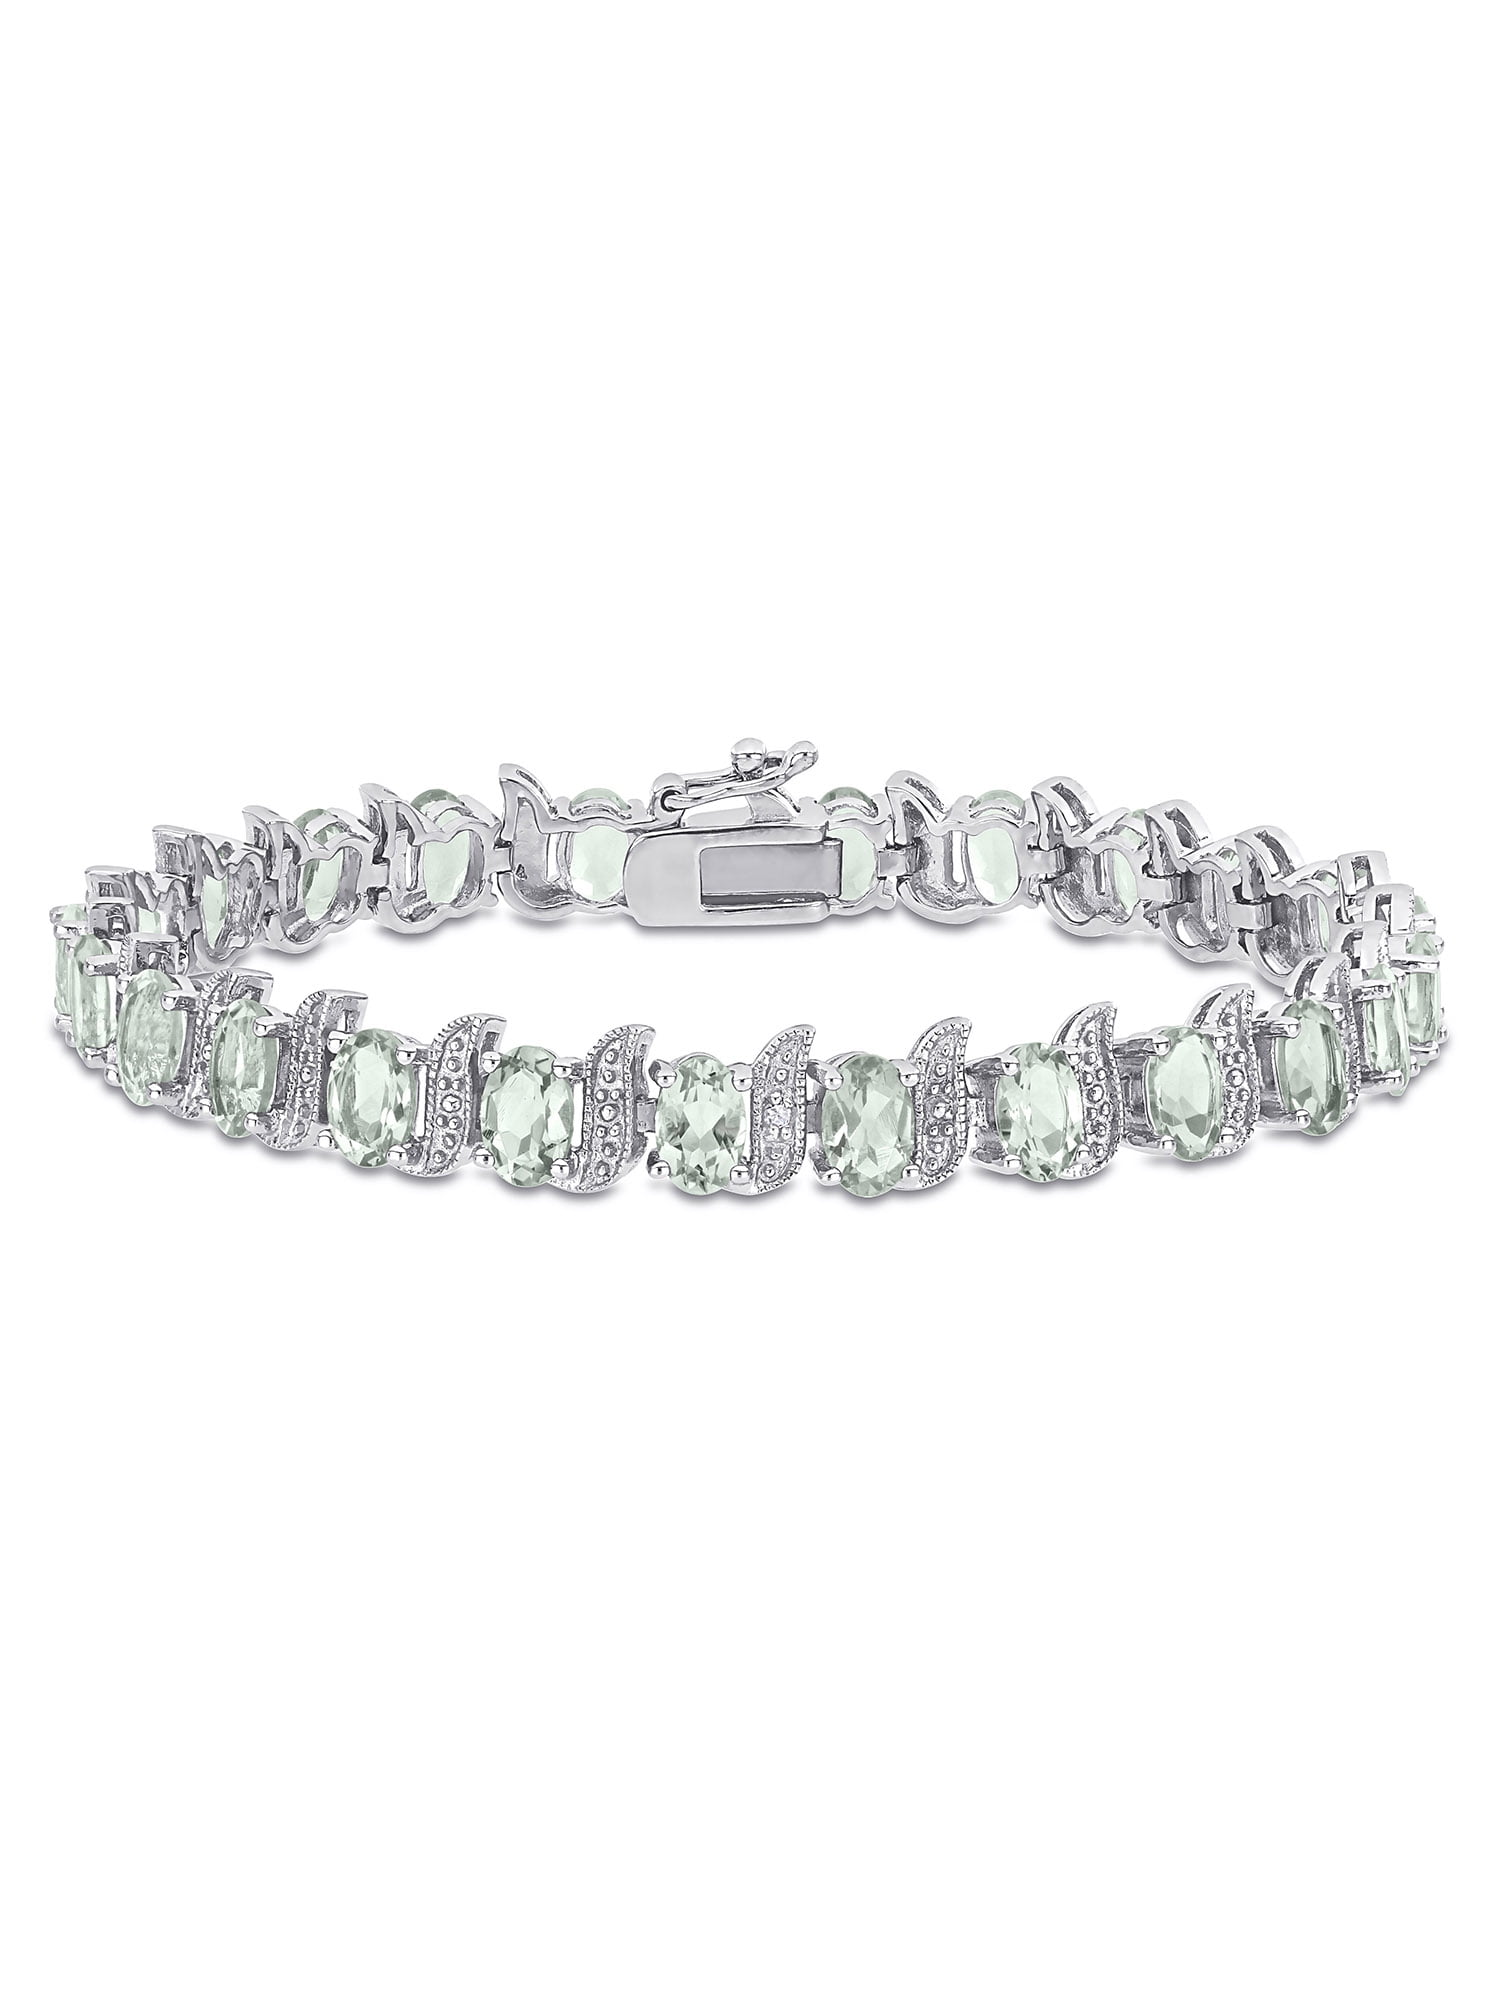 16ct Peridot AAA White Gold on 925 Sterling Silver Tennis Bracelet 7.25 or 8